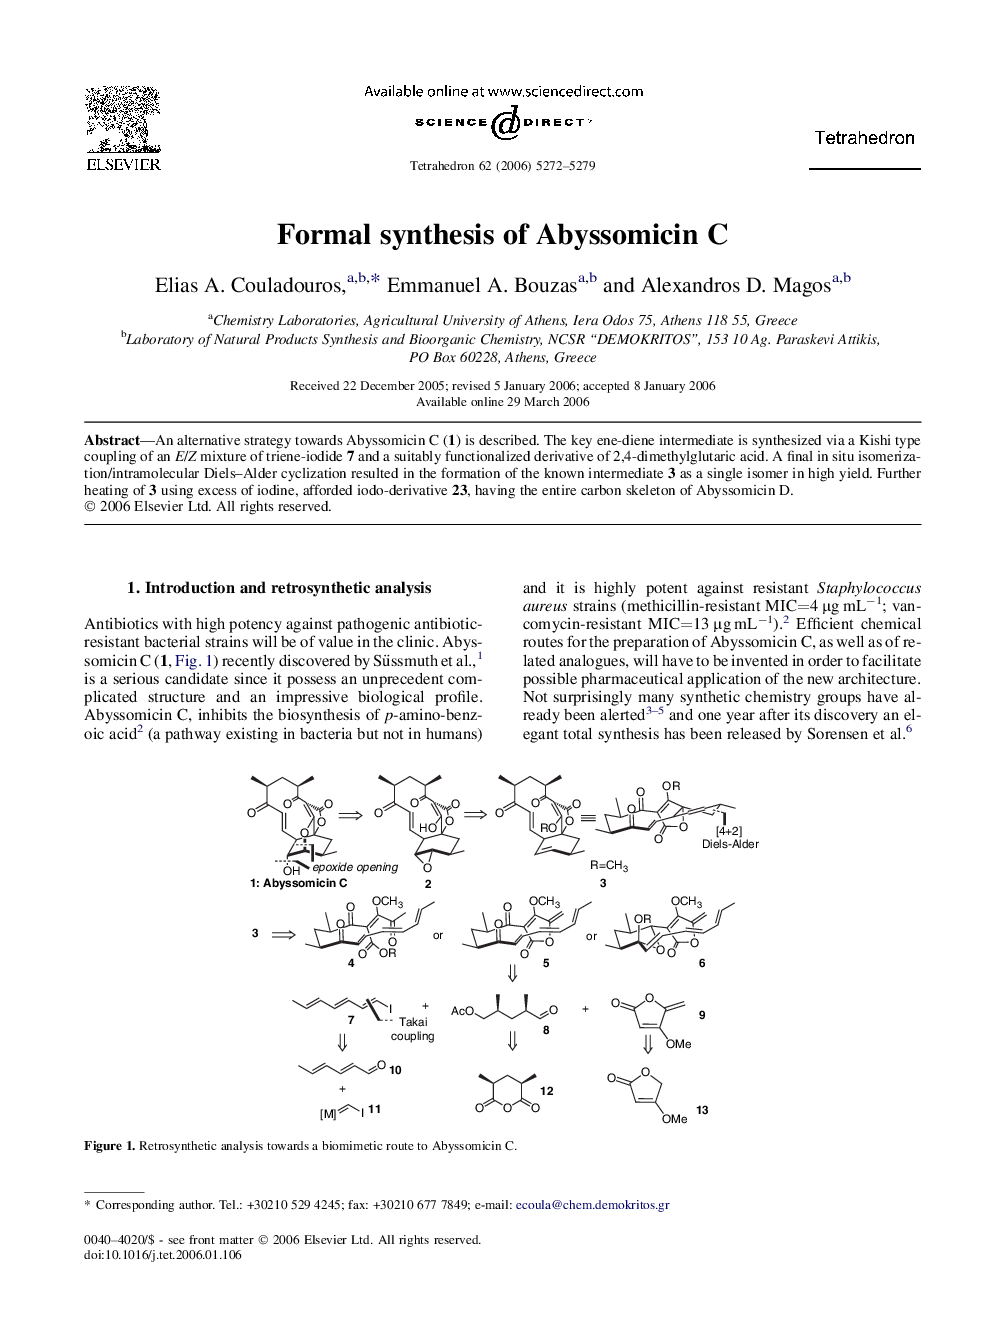 Formal synthesis of Abyssomicin C